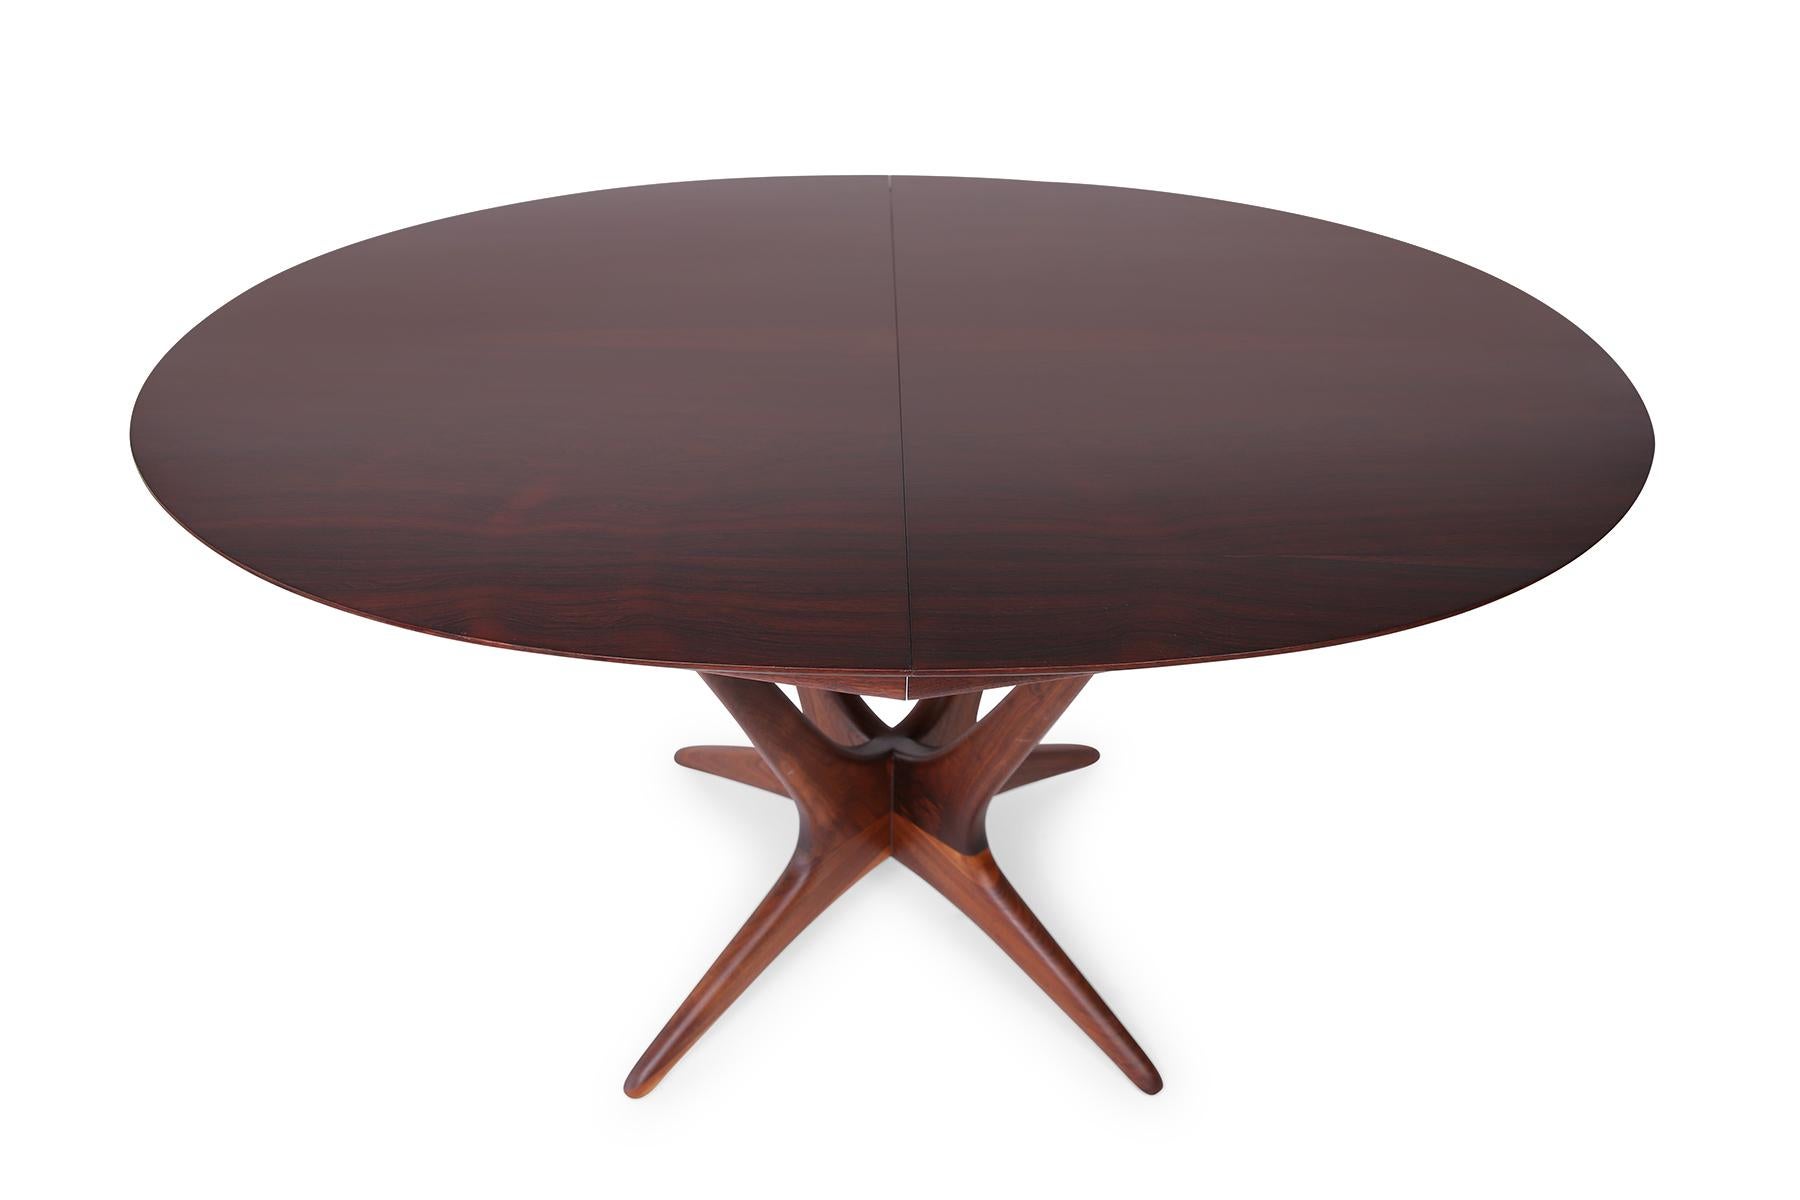 This seldom-seen Kagan studio made dining table features a central solid walnut base with distinctive sculptural branching structure based on his fascination with growth patterns of aboreal roots and branches. The table top is completely made from